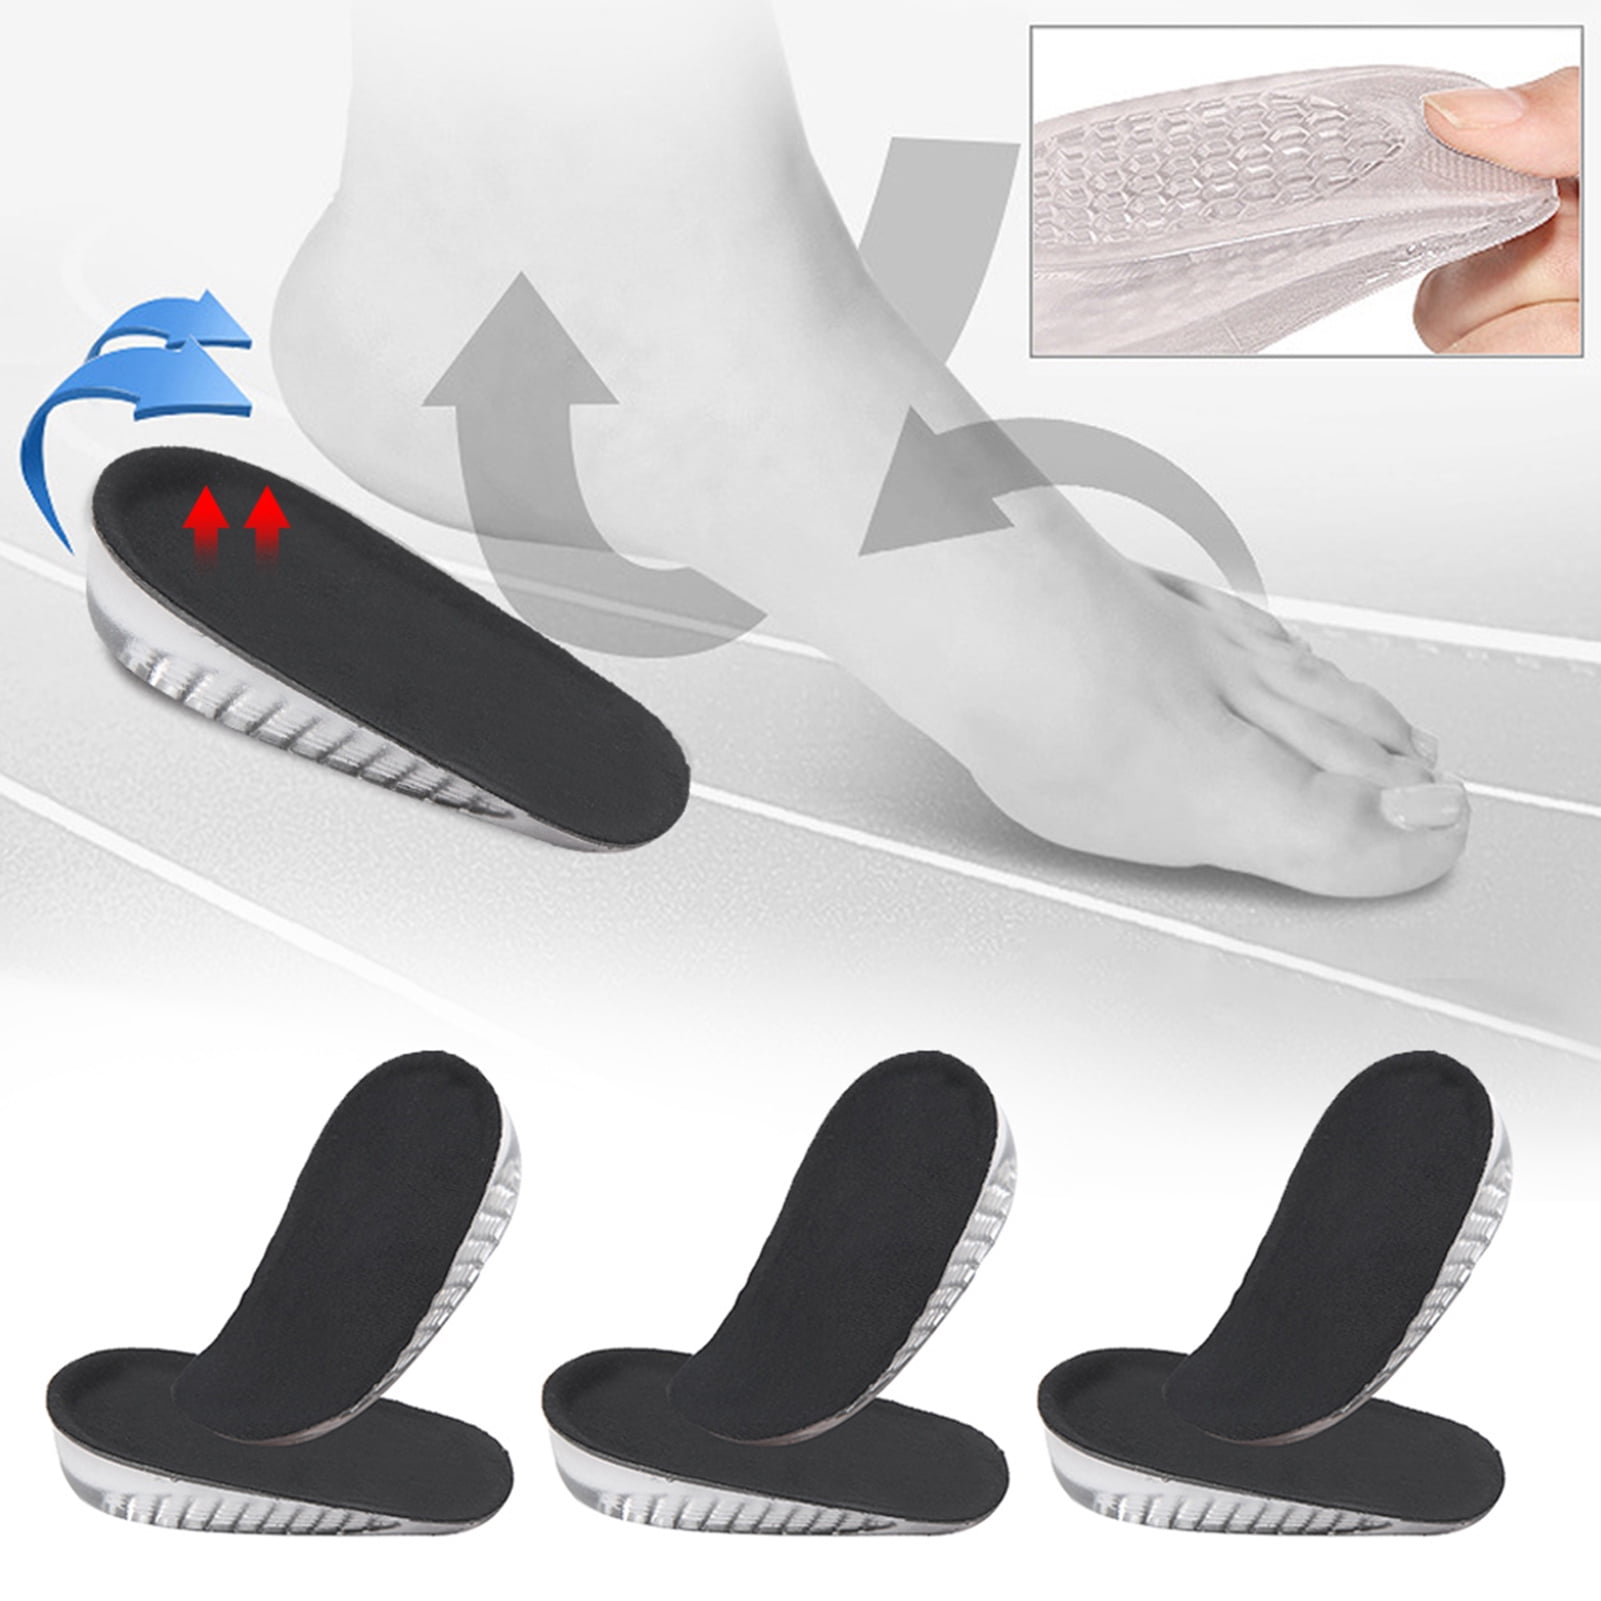 2X Sticky Fabric Shoes Back Heel Inserts Insoles Pads Cushion Liner Grips RS 